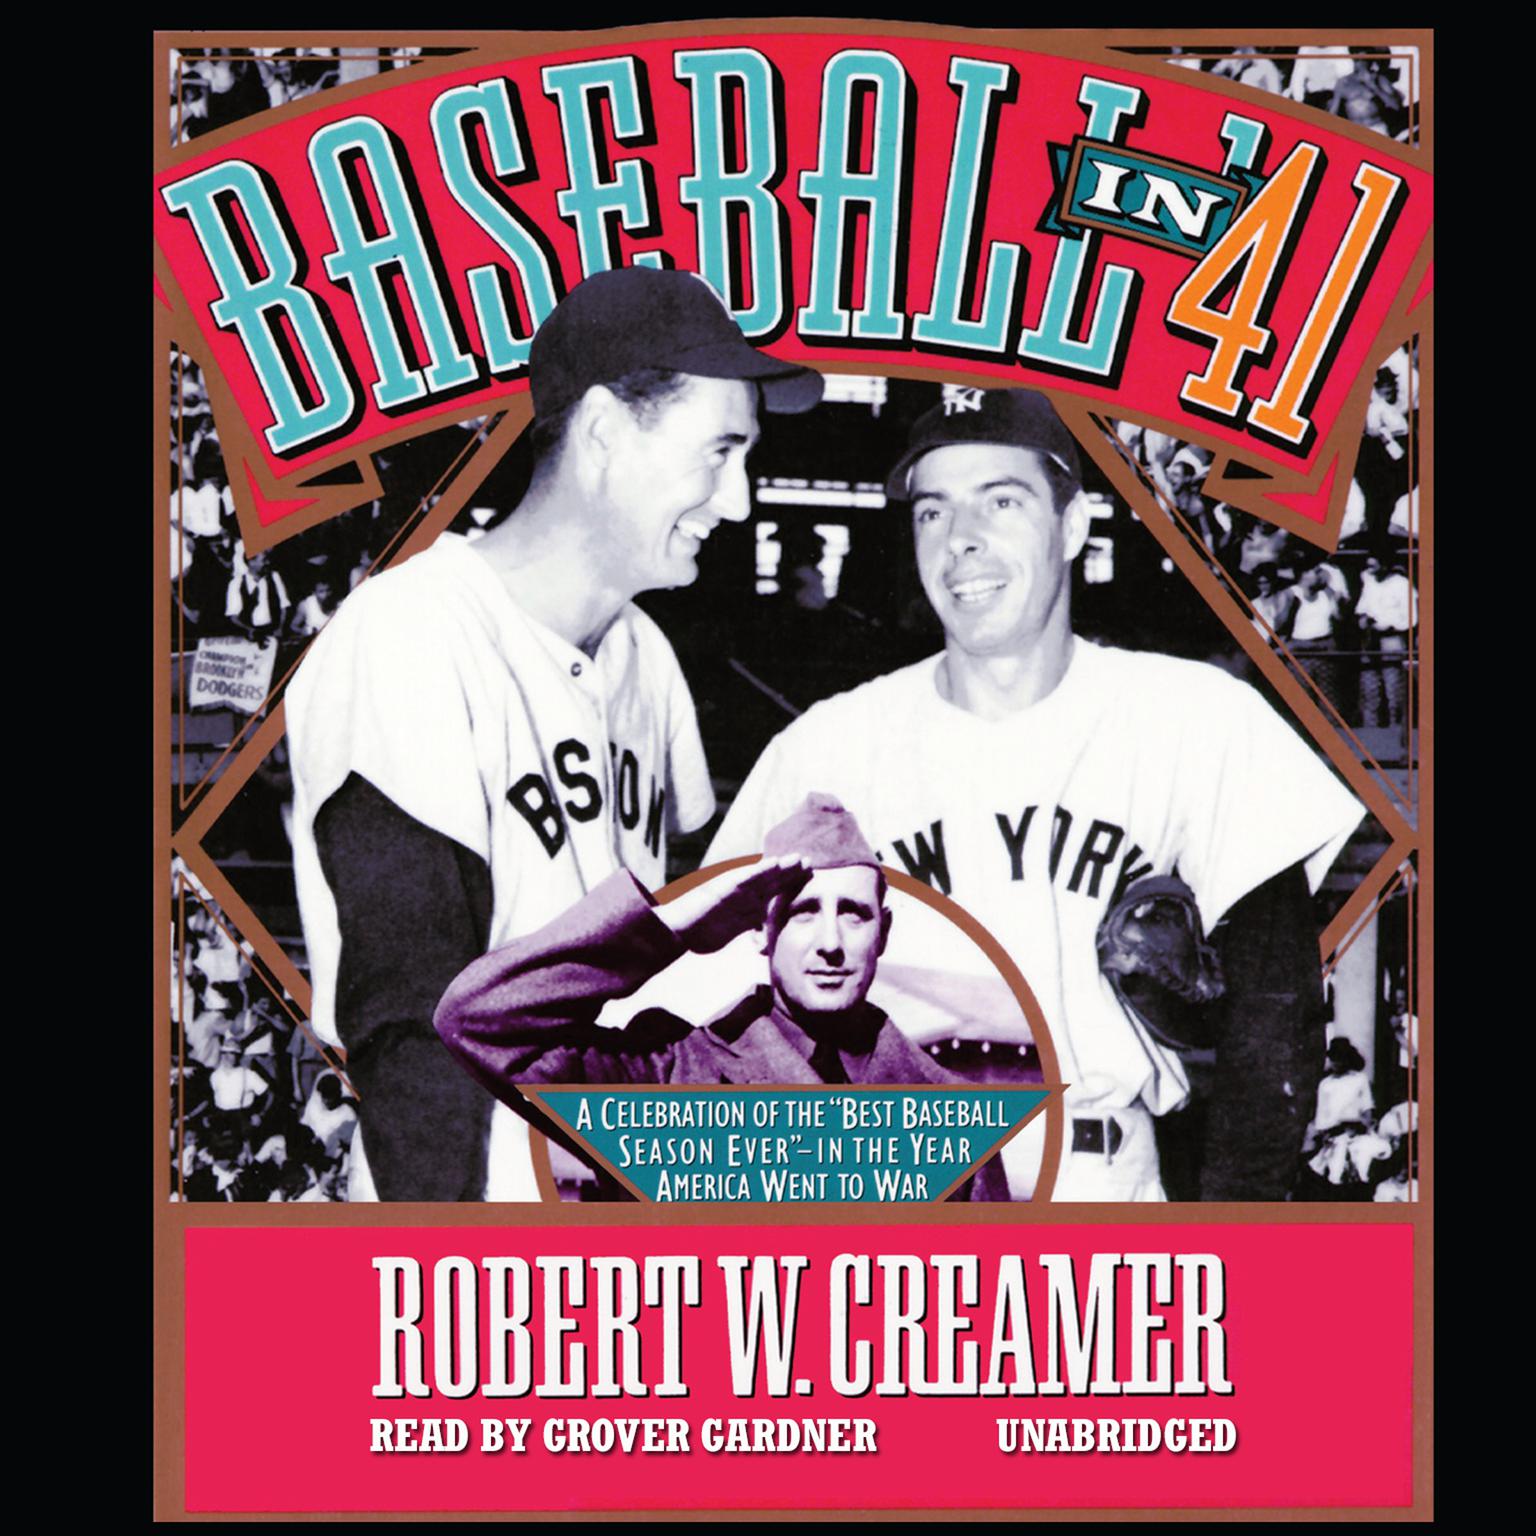 Baseball in ’41: A Celebration of the “Best Baseball Season Ever”—in the Year America Went to War Audiobook, by Robert W. Creamer